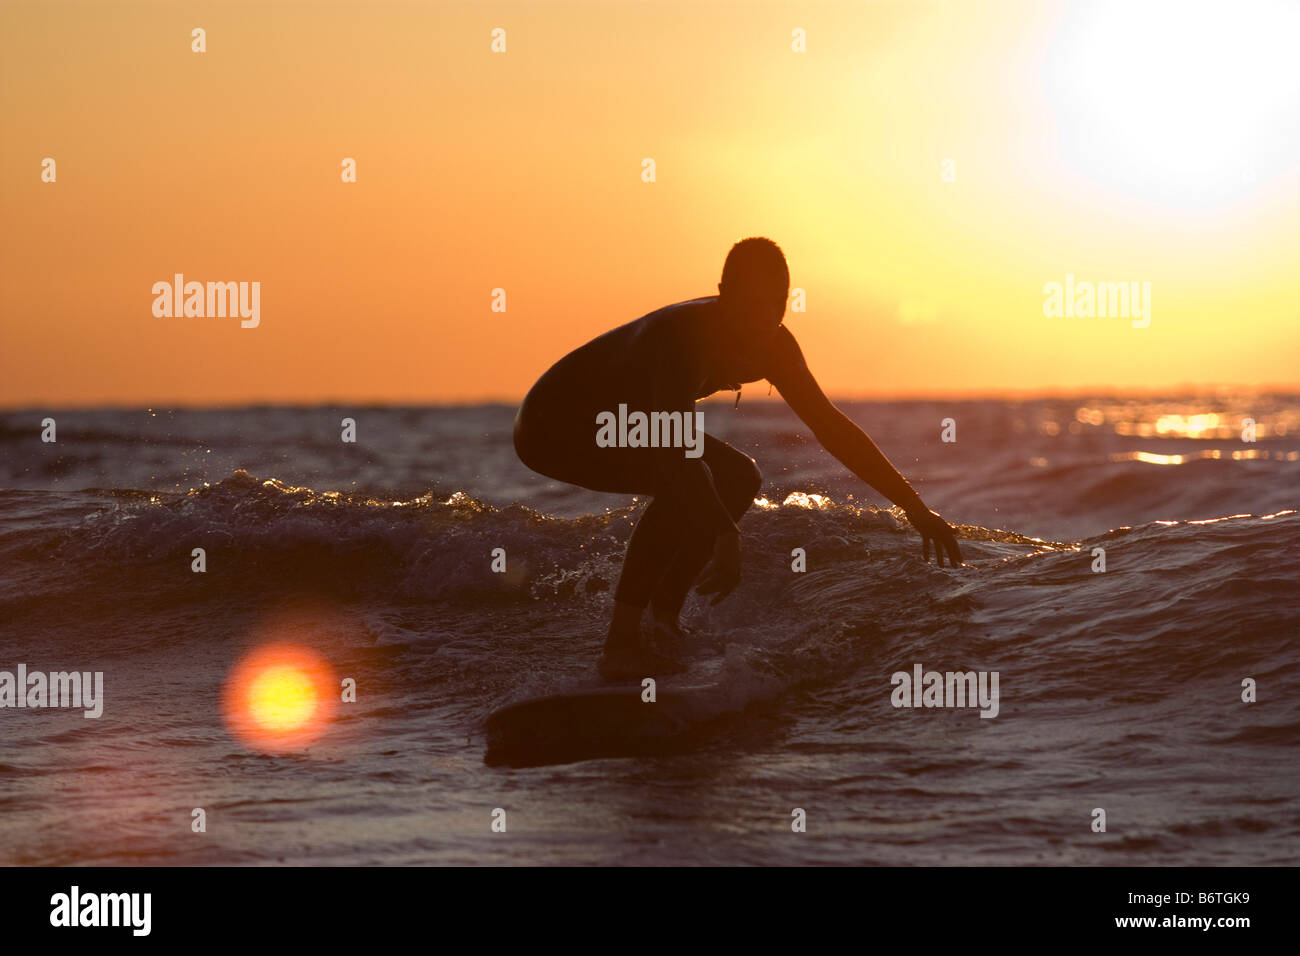 Surfer riding in on small wave at sunset on Lake Michigan Stock Photo